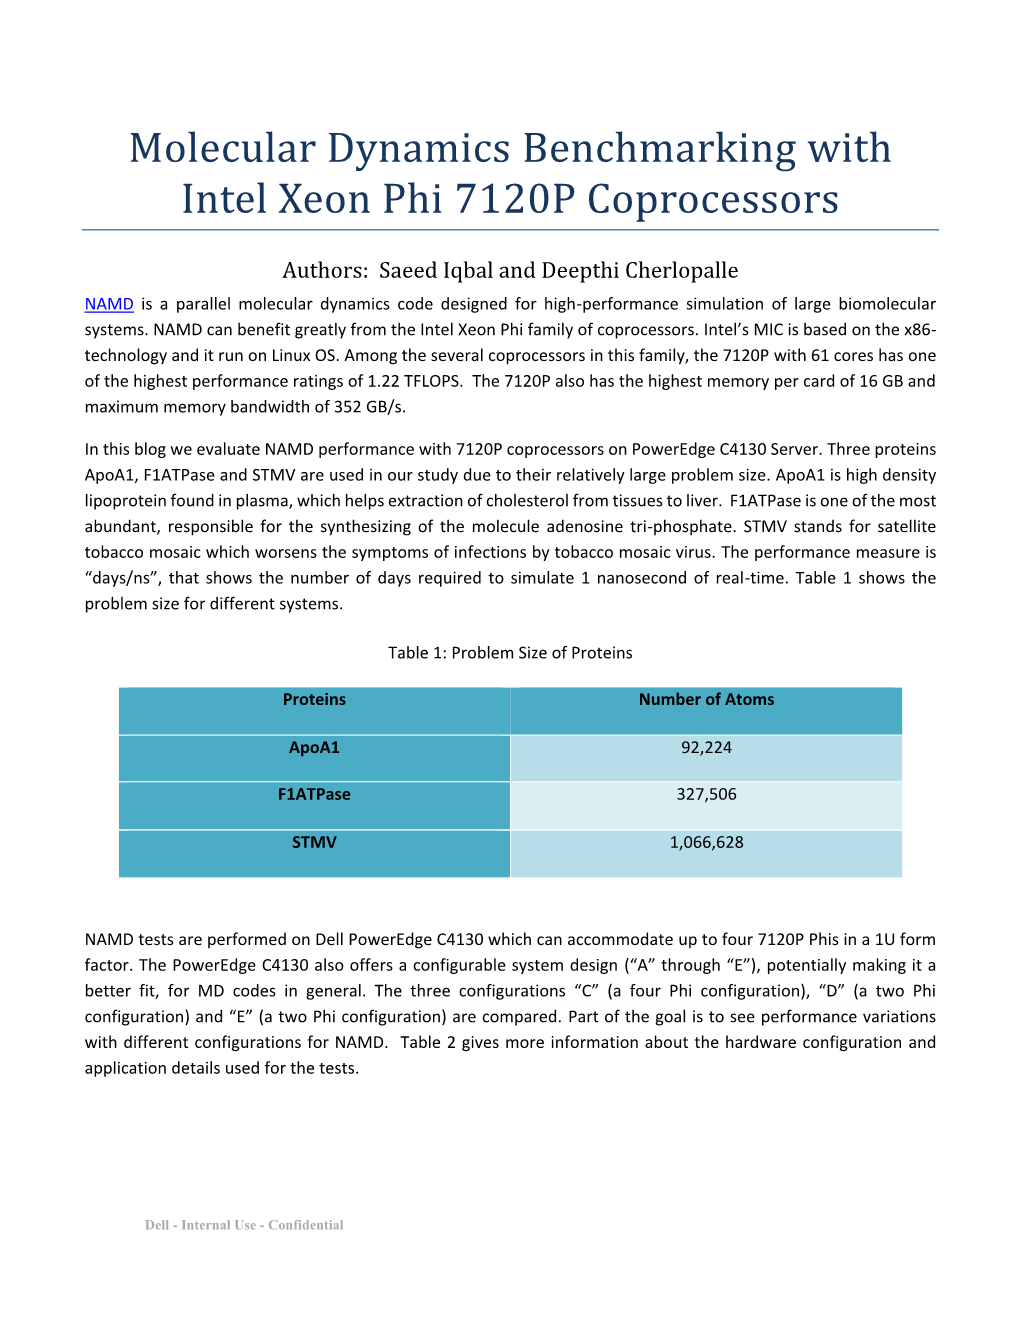 Molecular Dynamics Benchmarking with Intel Xeon Phi 7120P Coprocessors